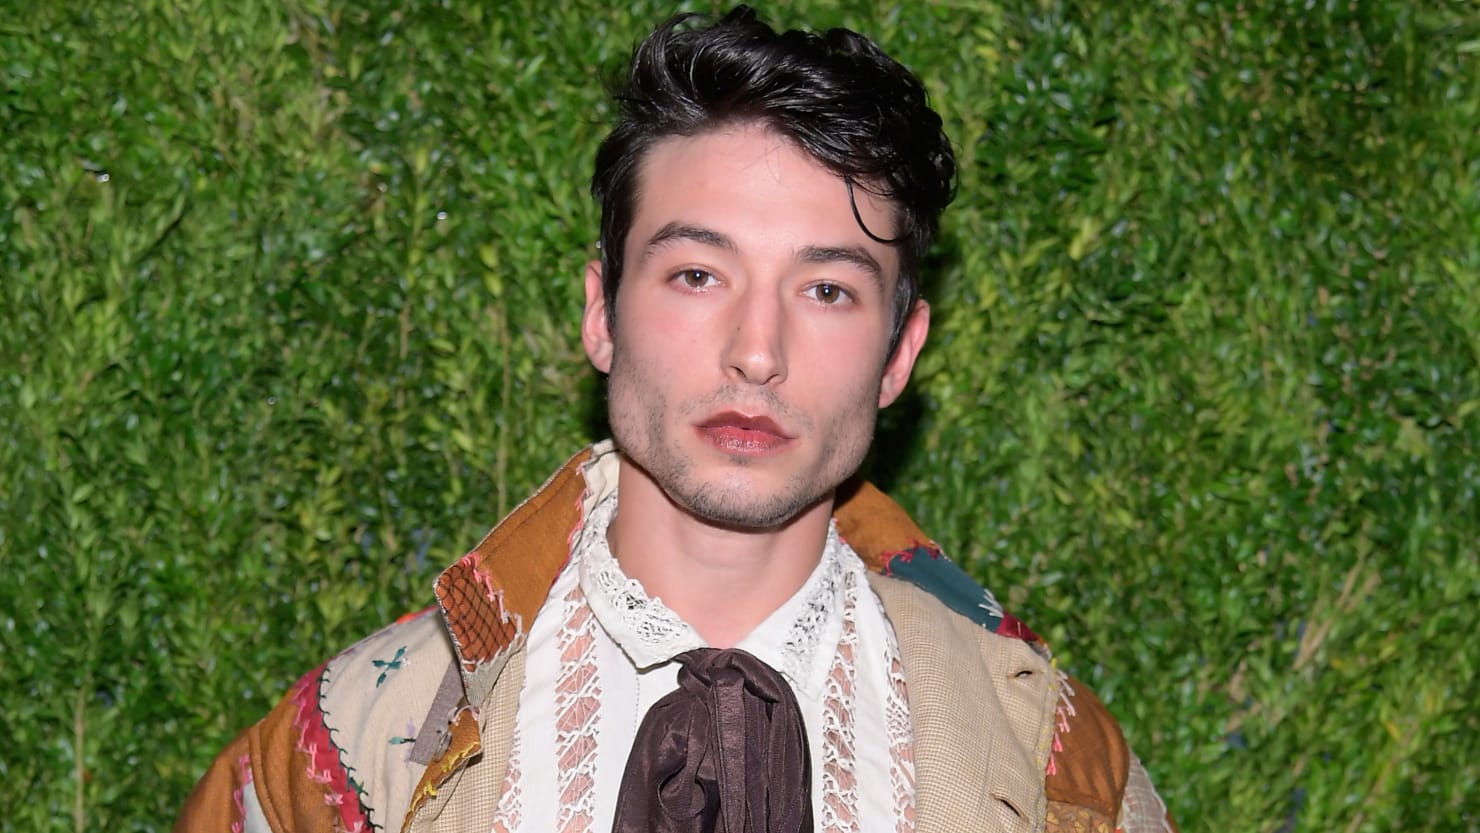 “Justice League” fans shouldn’t forget about Ezra Miller’s attack video